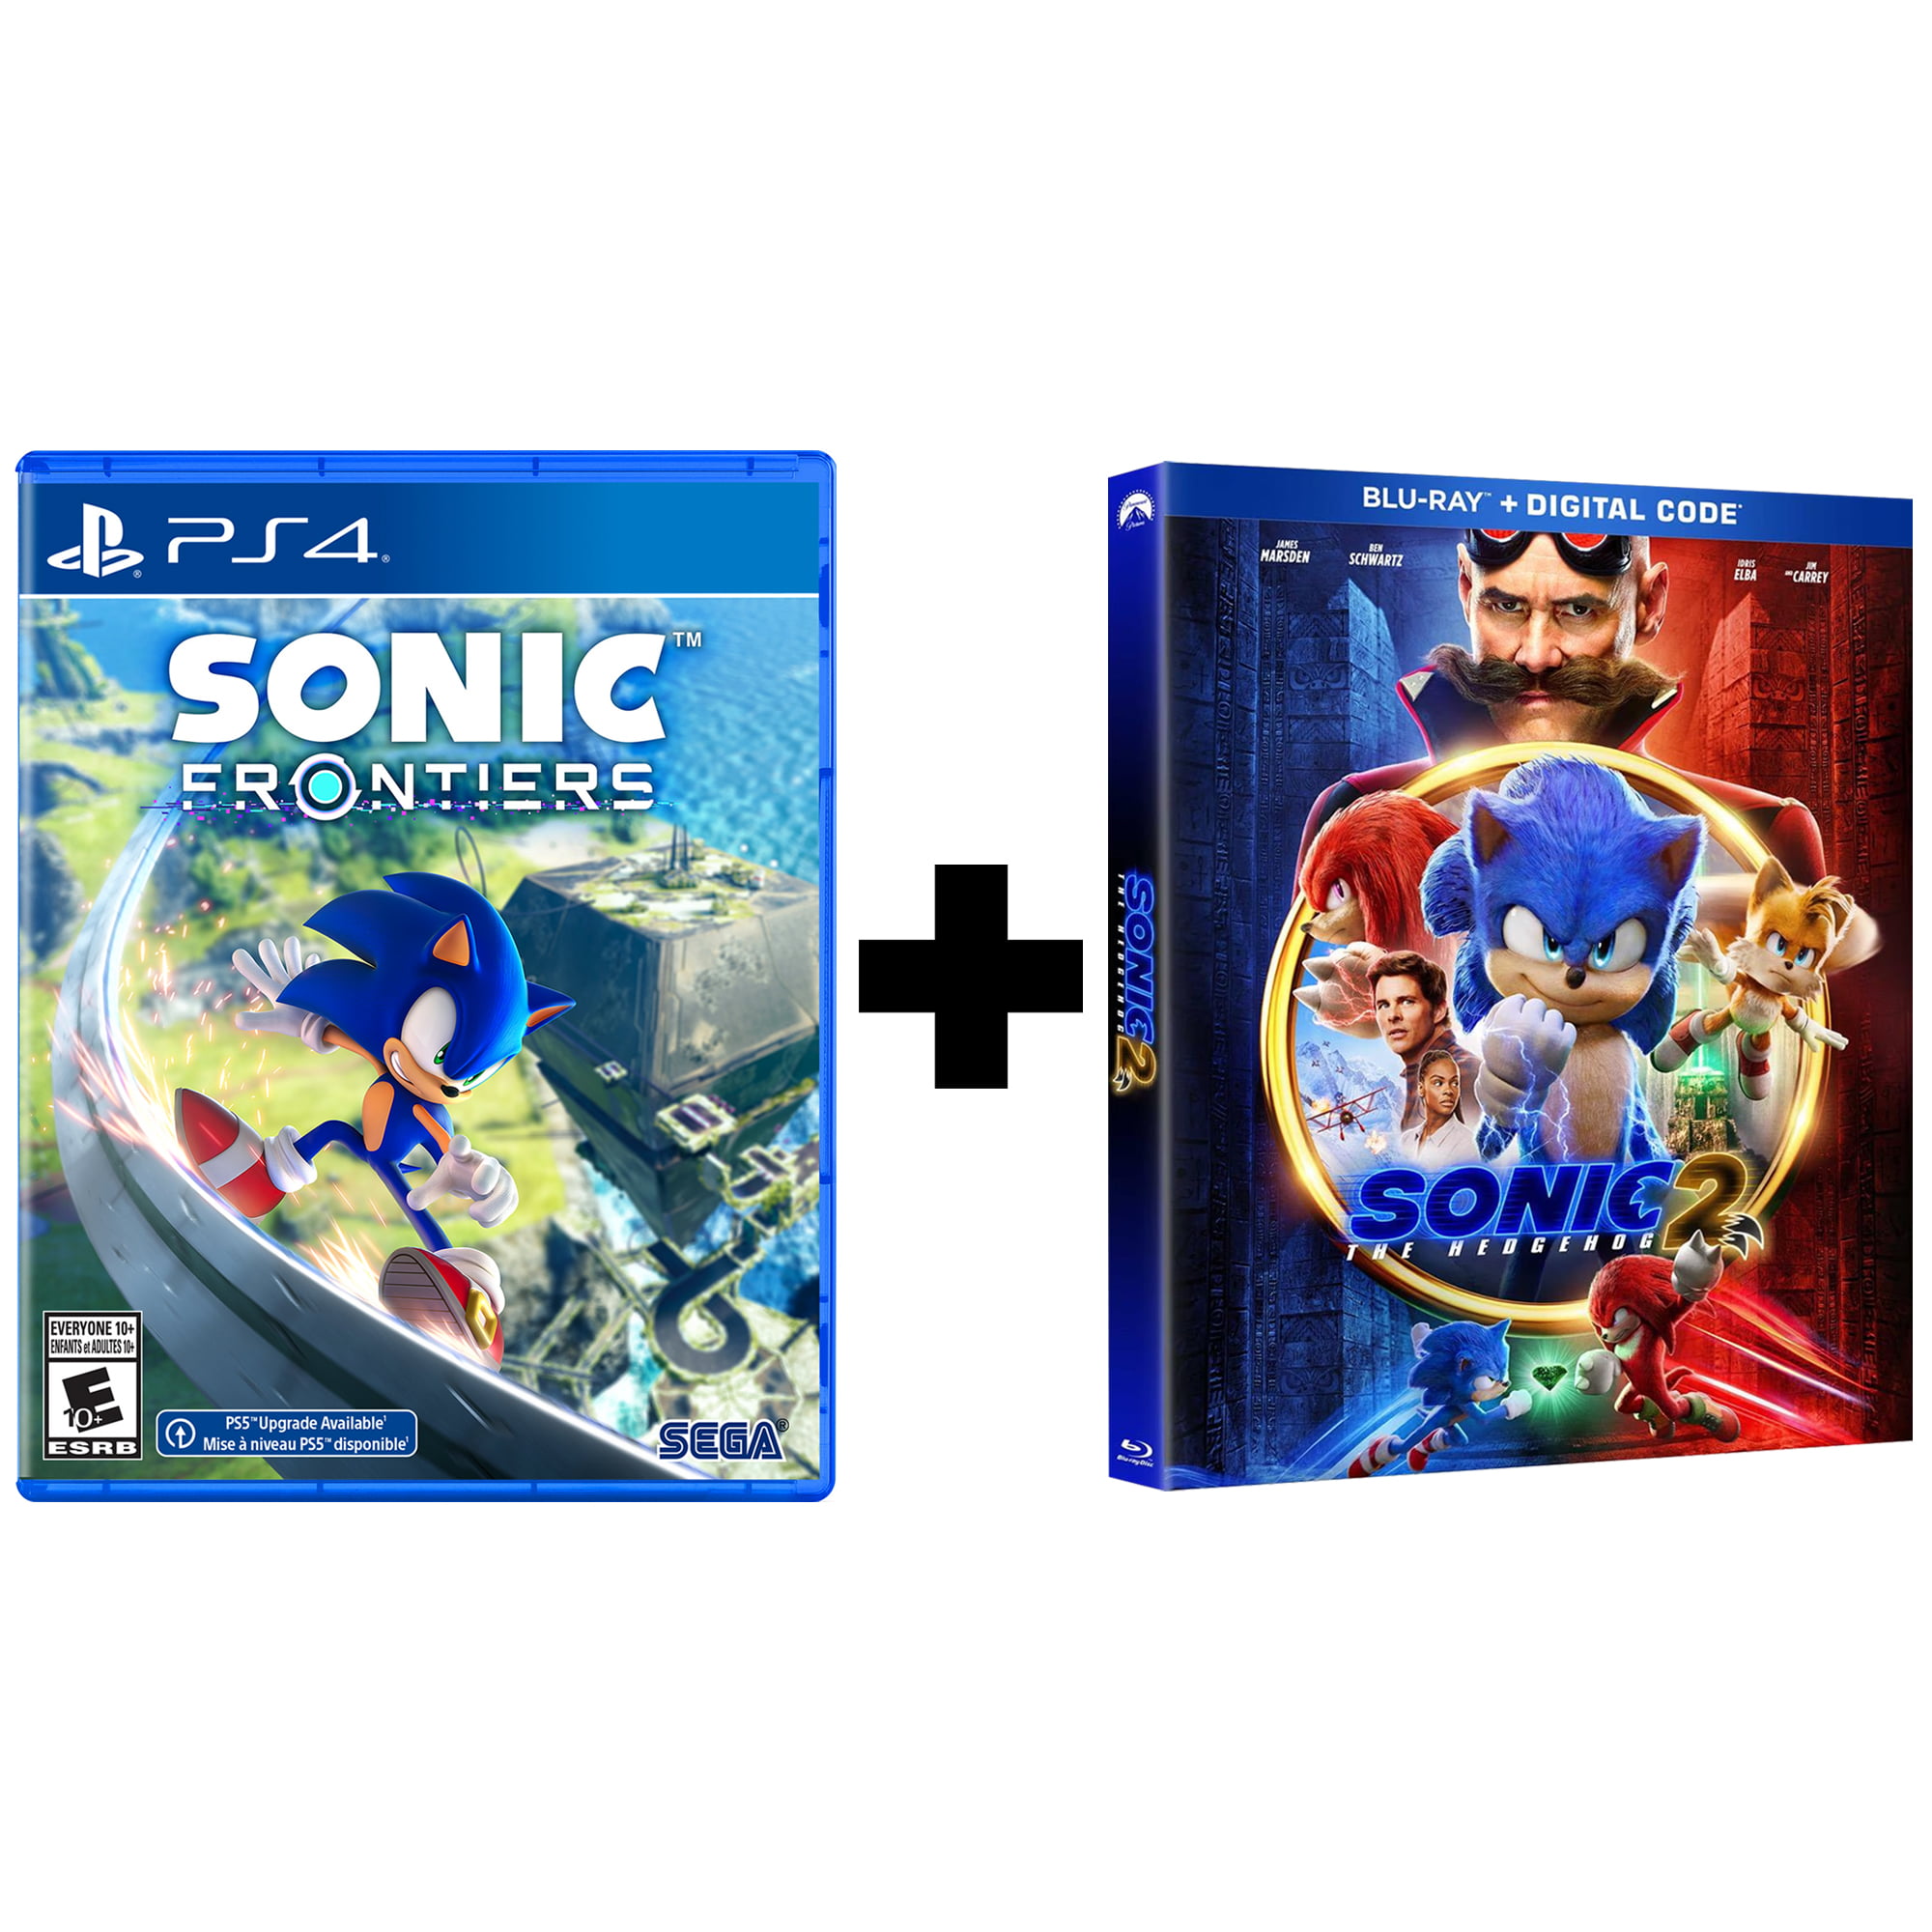 Frontiers PlayStation 4 and Sonic The Hedgehog 2 Movie [Bundle] - Walmart.com